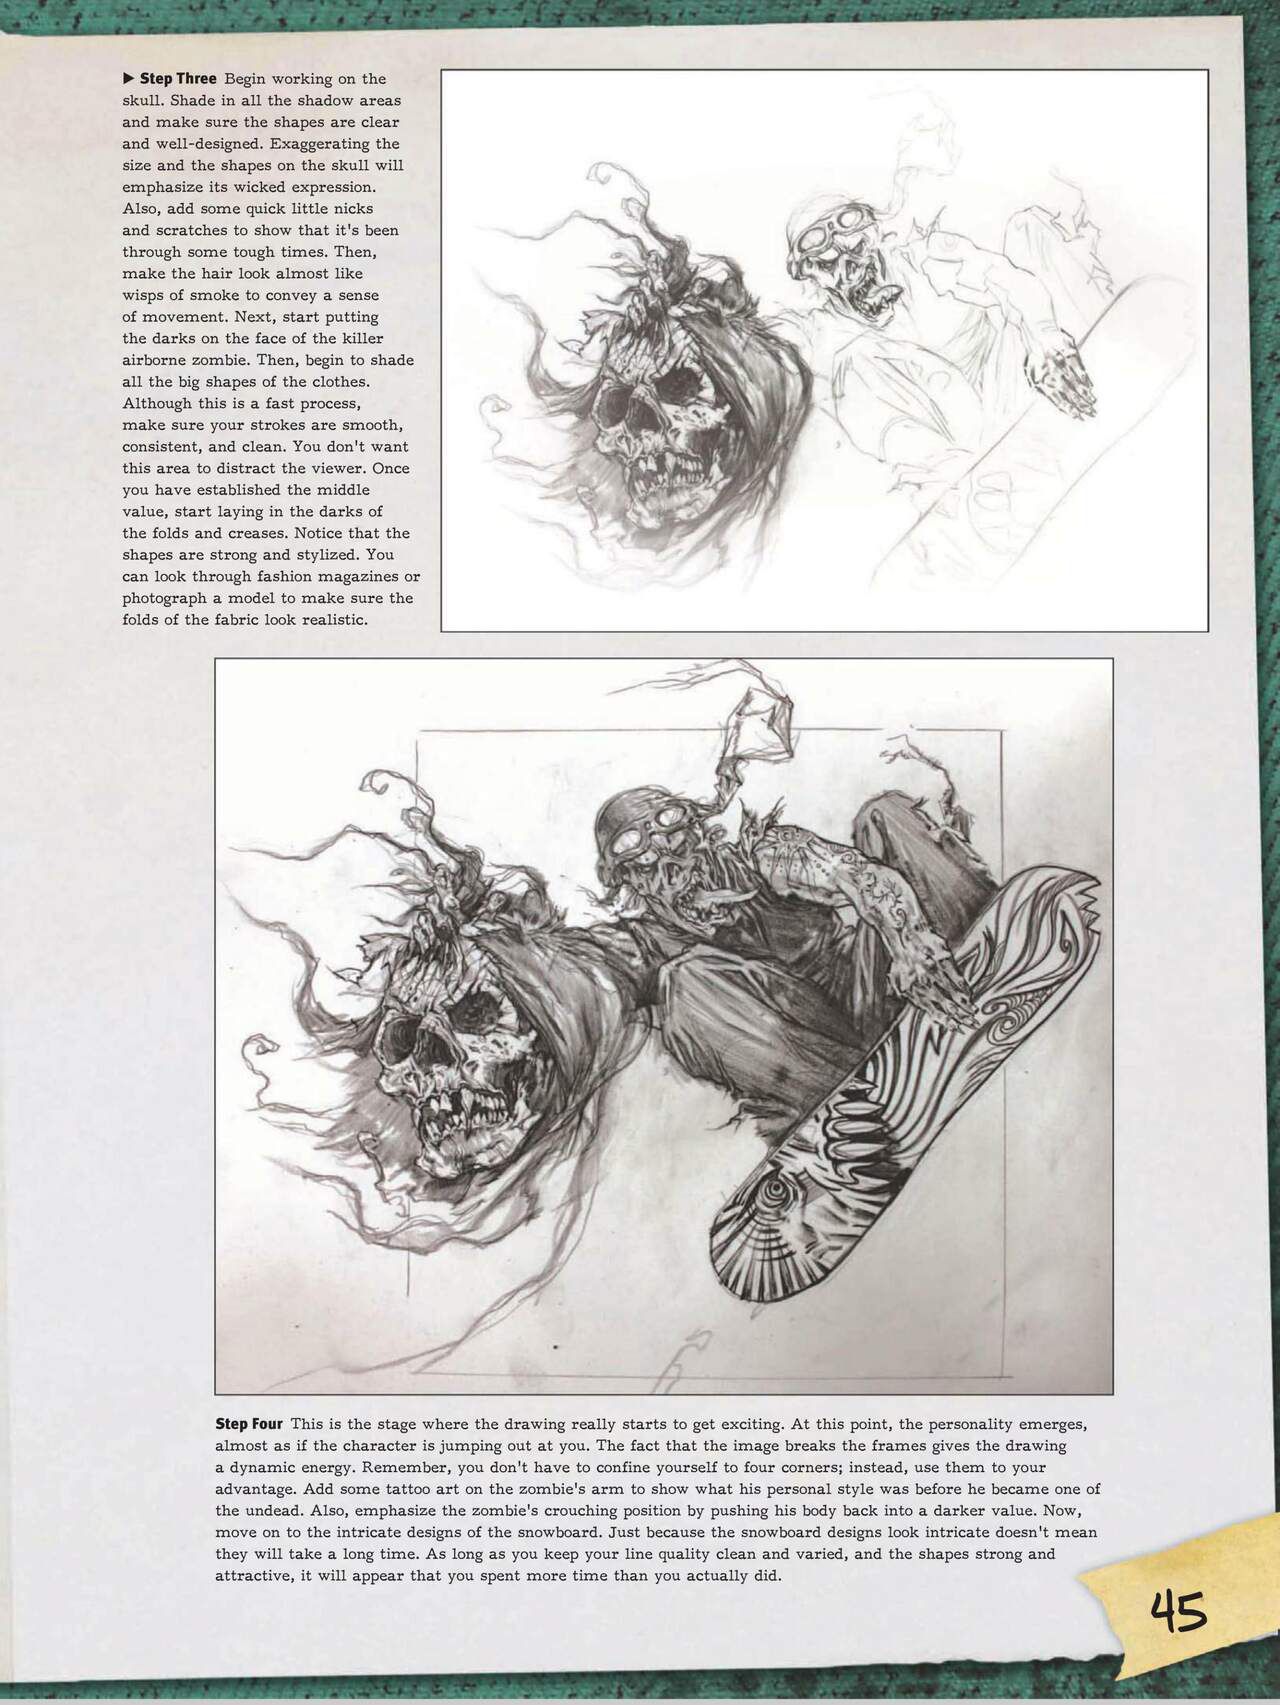 How to Draw Zombies: Discover the secrets to drawing, painting, and illustrating the undead 僵尸描绘集 46